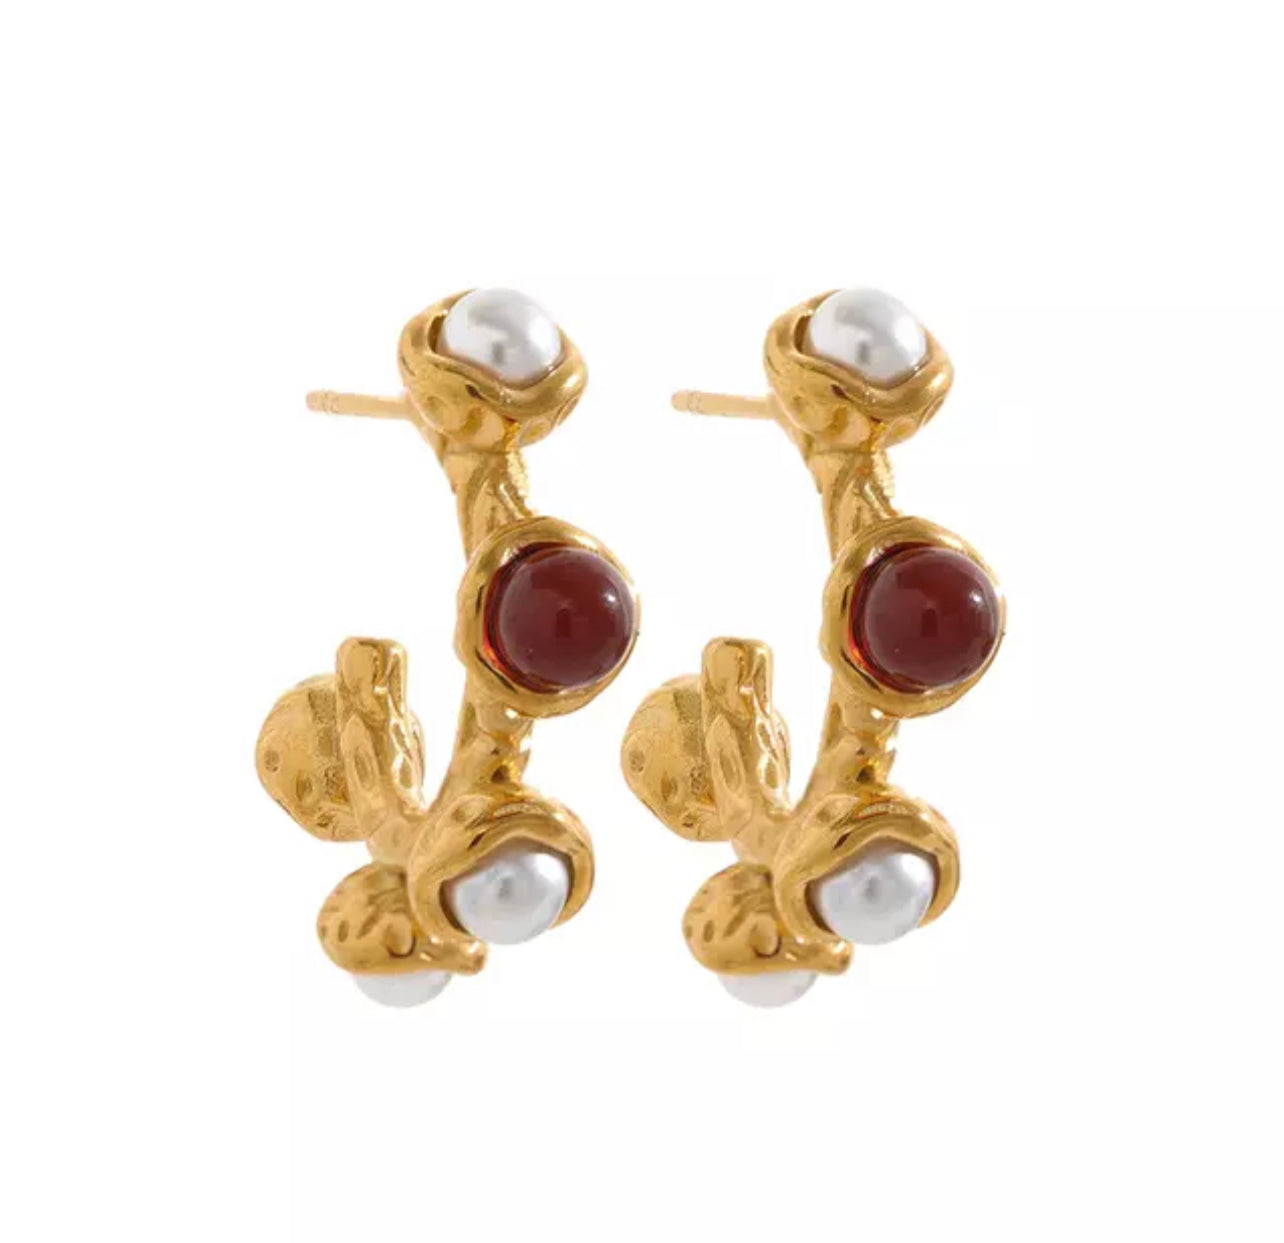 Stainless steal honey agates and pearls earrings